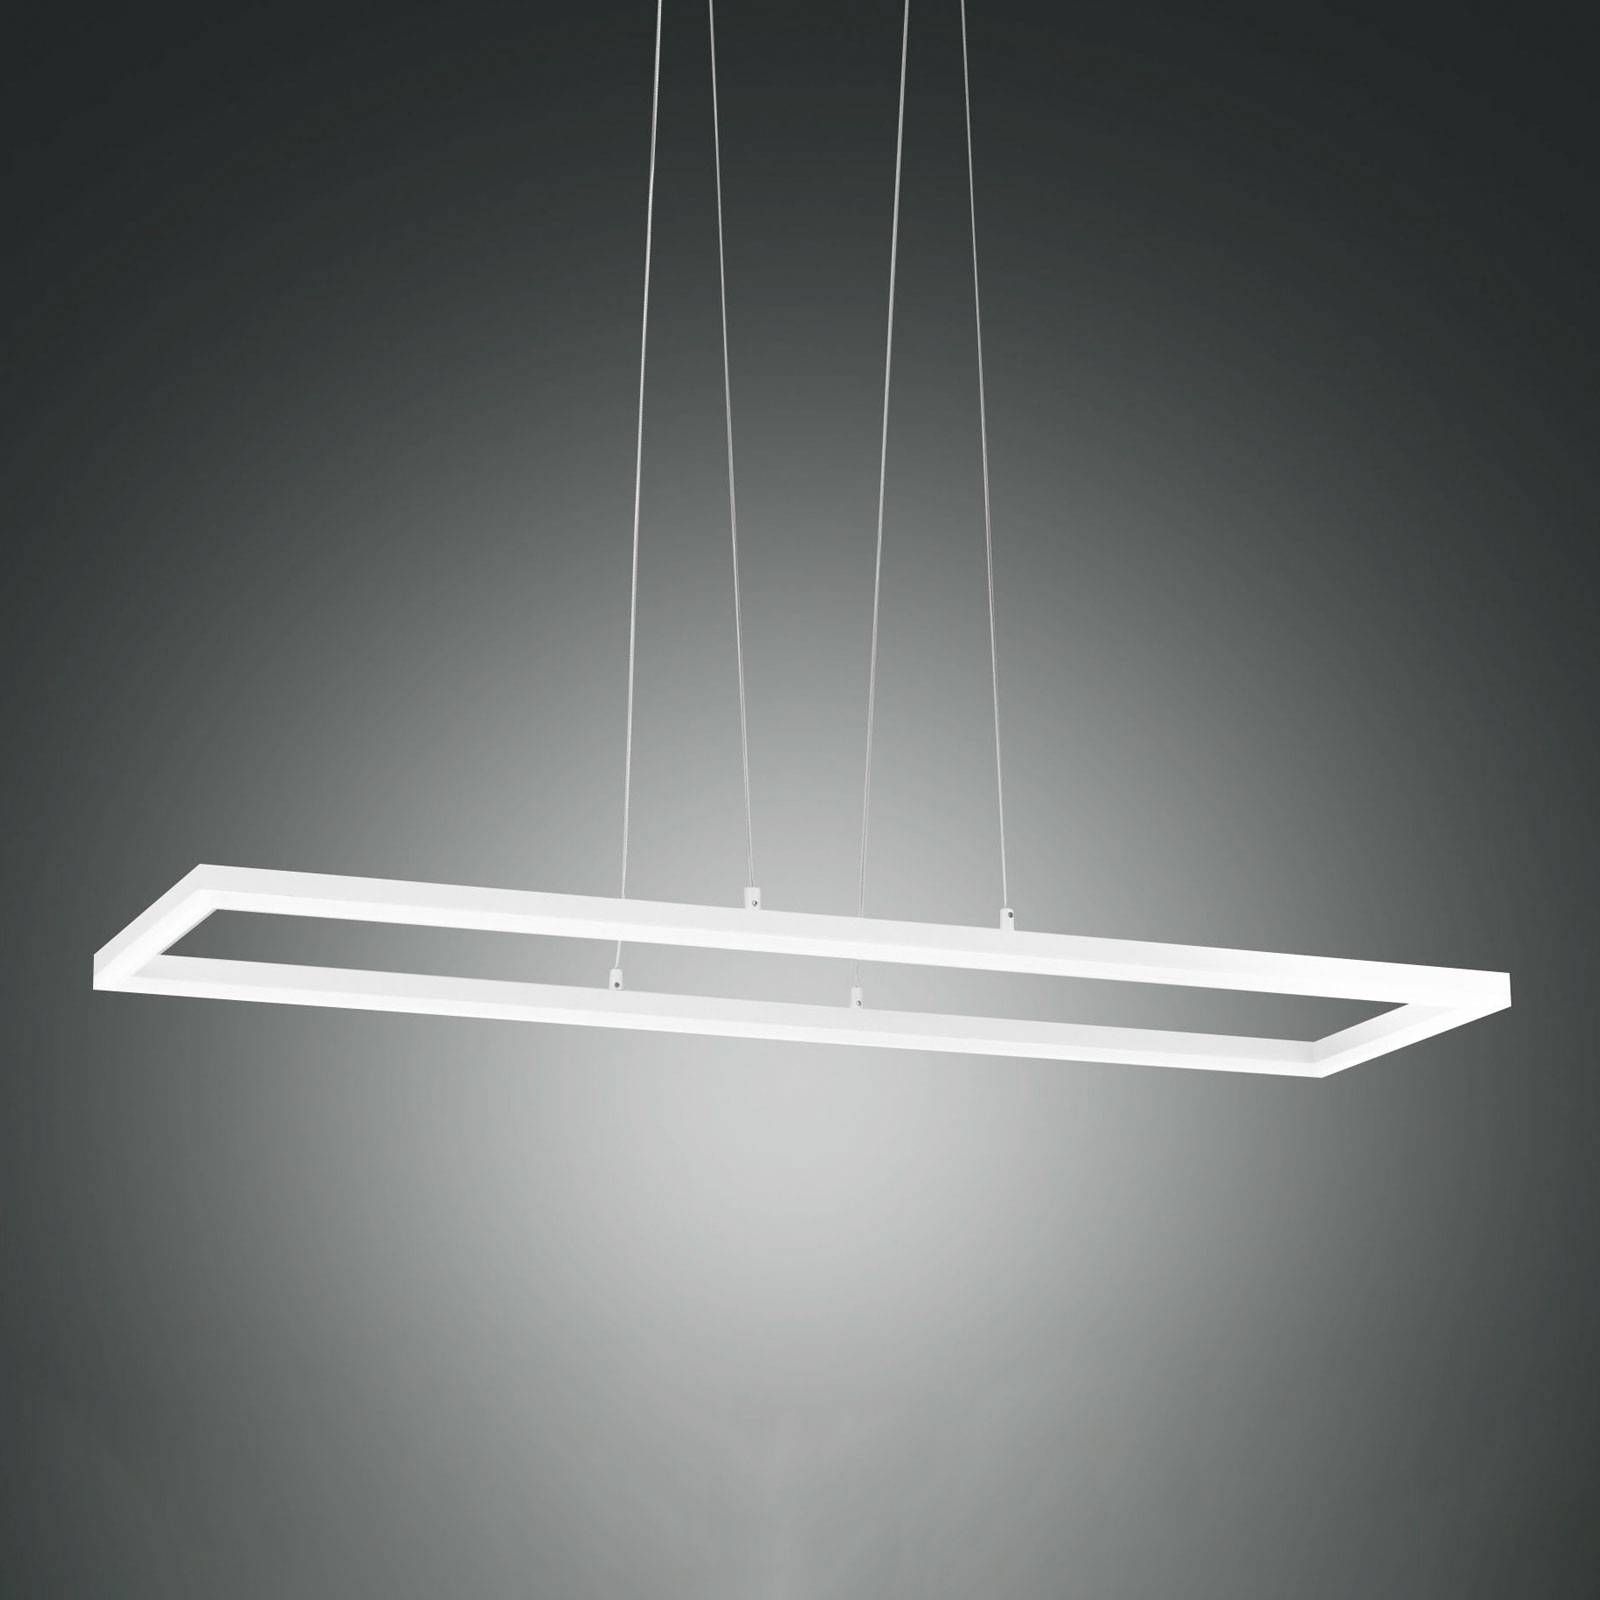 Fabas Luce LED-Pendelleuchte Bard, 92x32 cm in Weiß